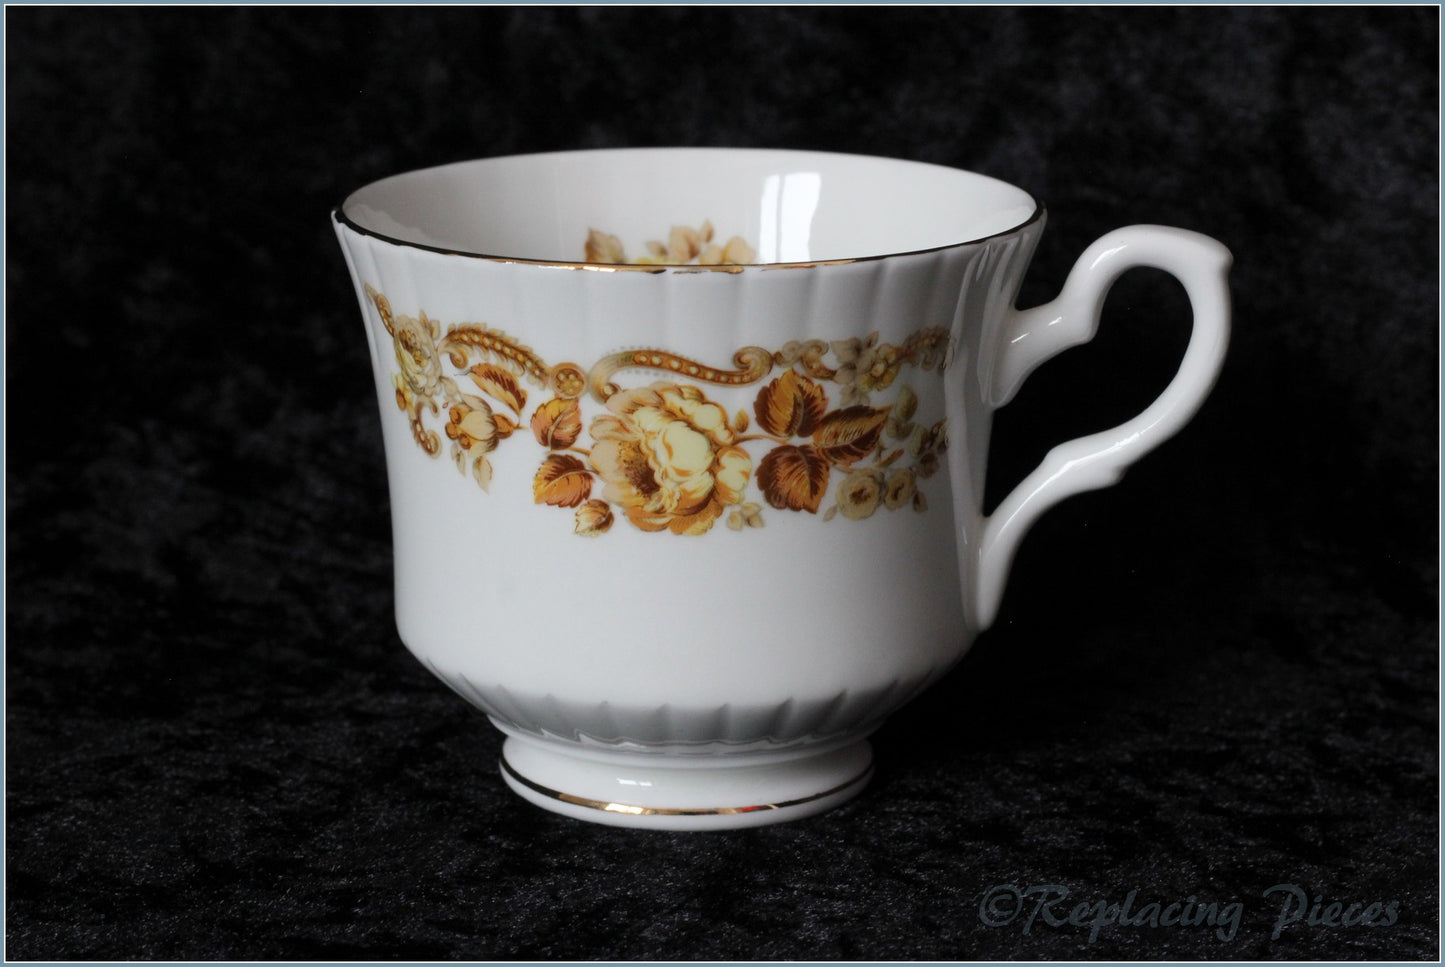 Royal Stafford - Unknown 1 - Teacup